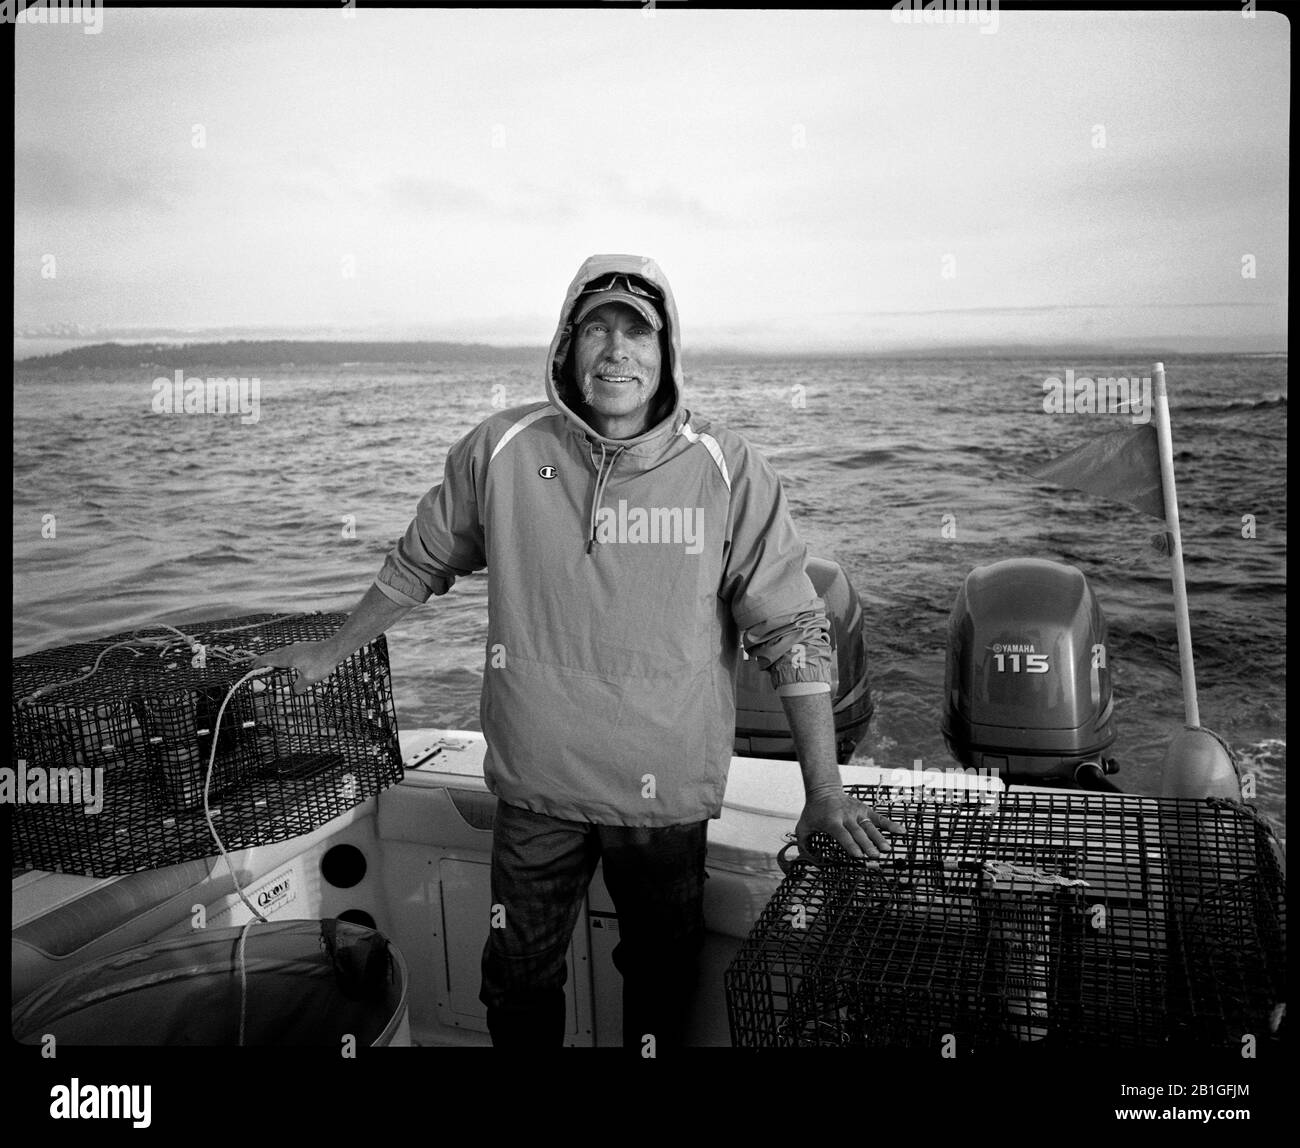 HB39101-00....WASHINGTON - Phil Russel shrimp fishing in the Puget Sound. Makina W67 Camera with Kodak 120 TXP Film processed in D76 1-1. Stock Photo